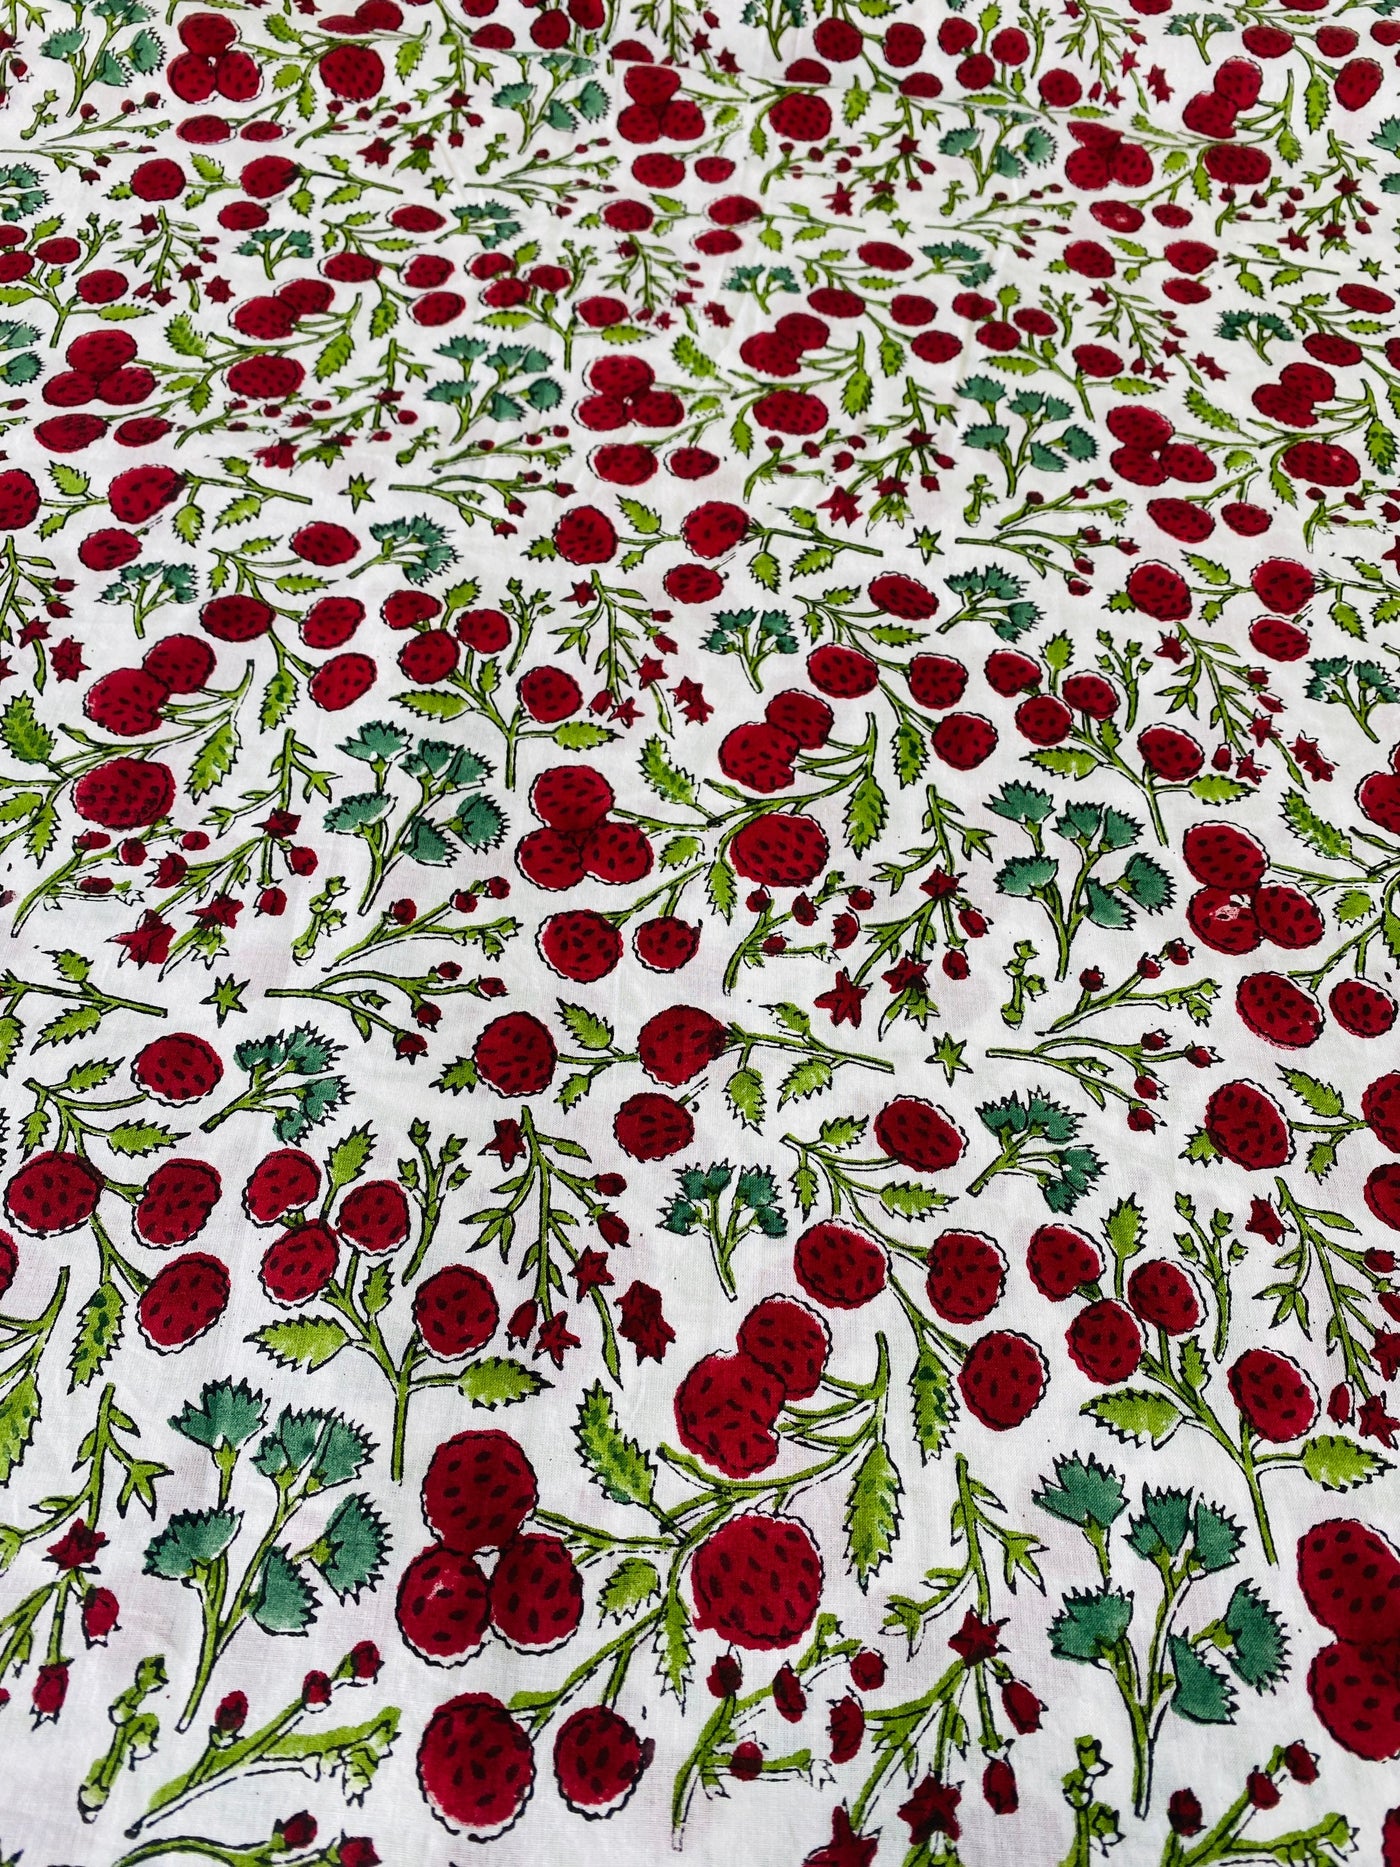 Garnet Red, Emerald and Moss Green Floral Indian Hand Block Print 100% Pure Cotton Cloth, Fabric by the yard, Women's Clothing Quilting Bag